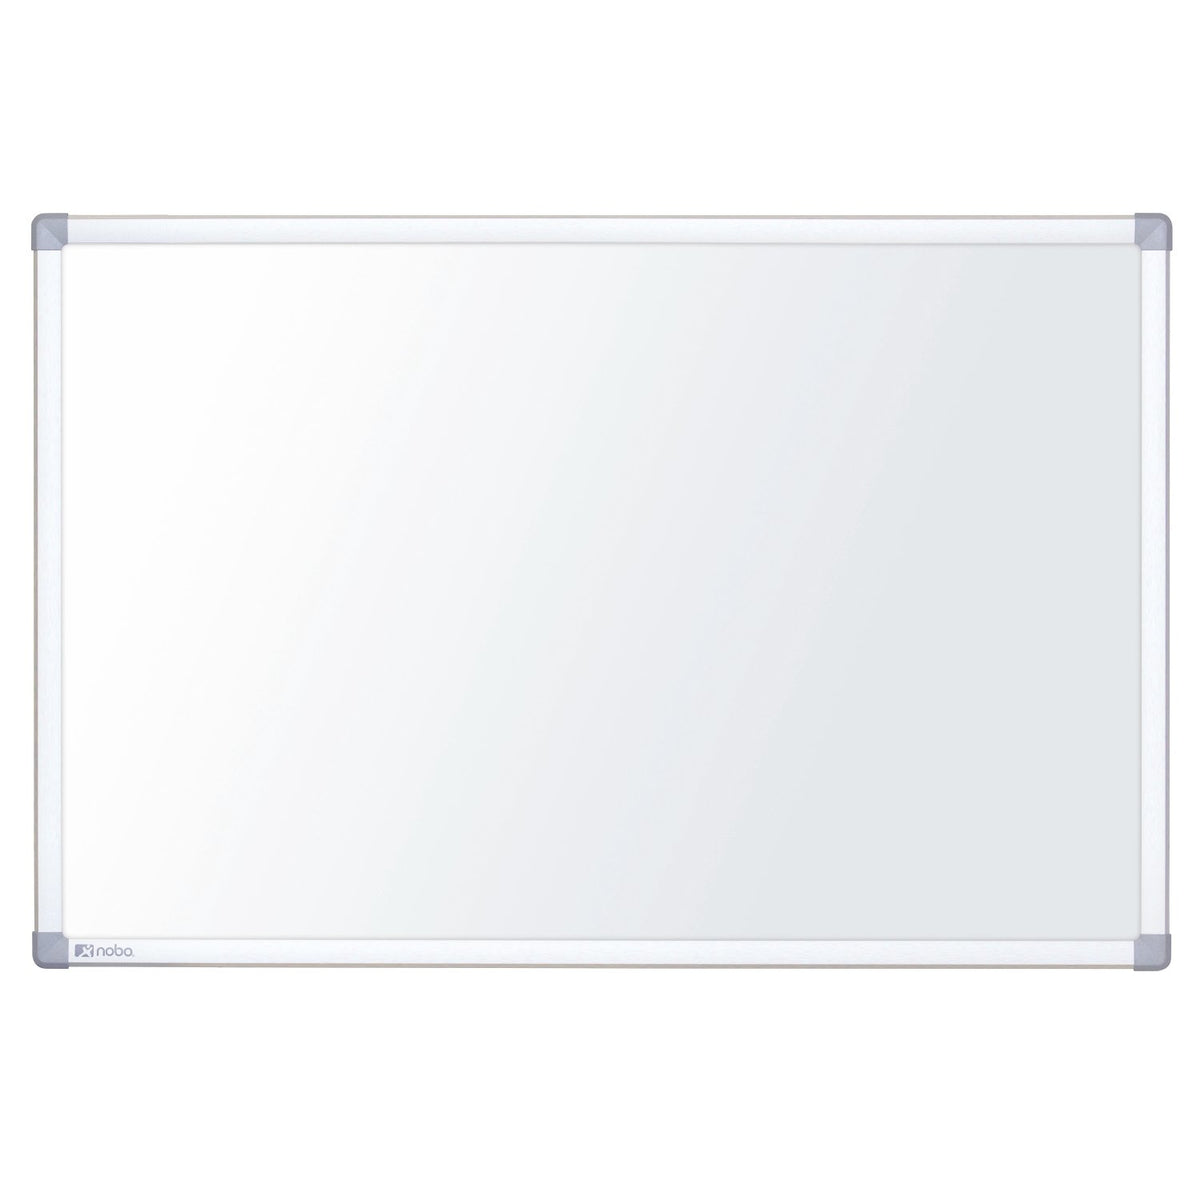 Nobo Nano Clean - White board - wall mountable - 1500 x 1000 mm - painted steel - magnetic - white - silver aluminum frame